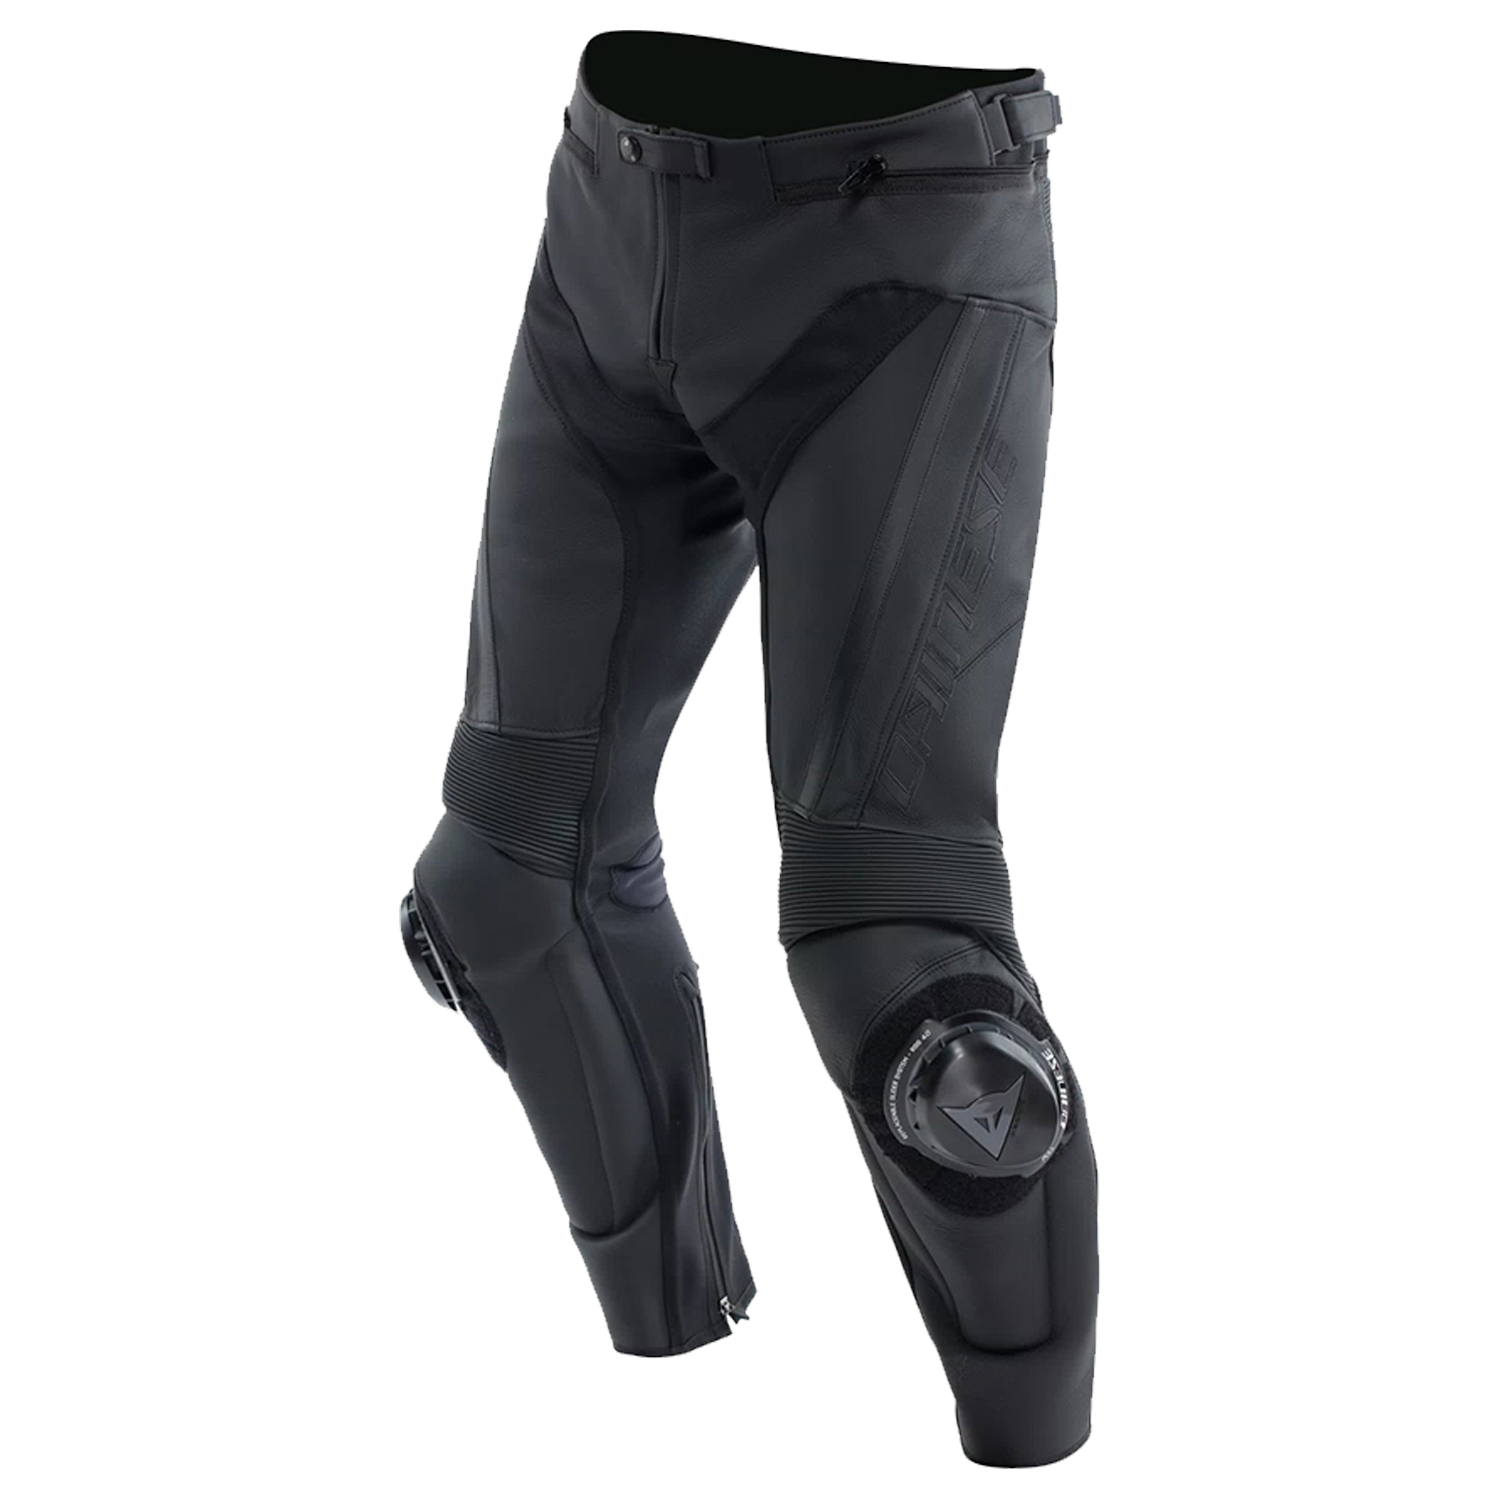 Image of Dainese Delta 4 Leather Pants Black Size 52 ID 8051019640246